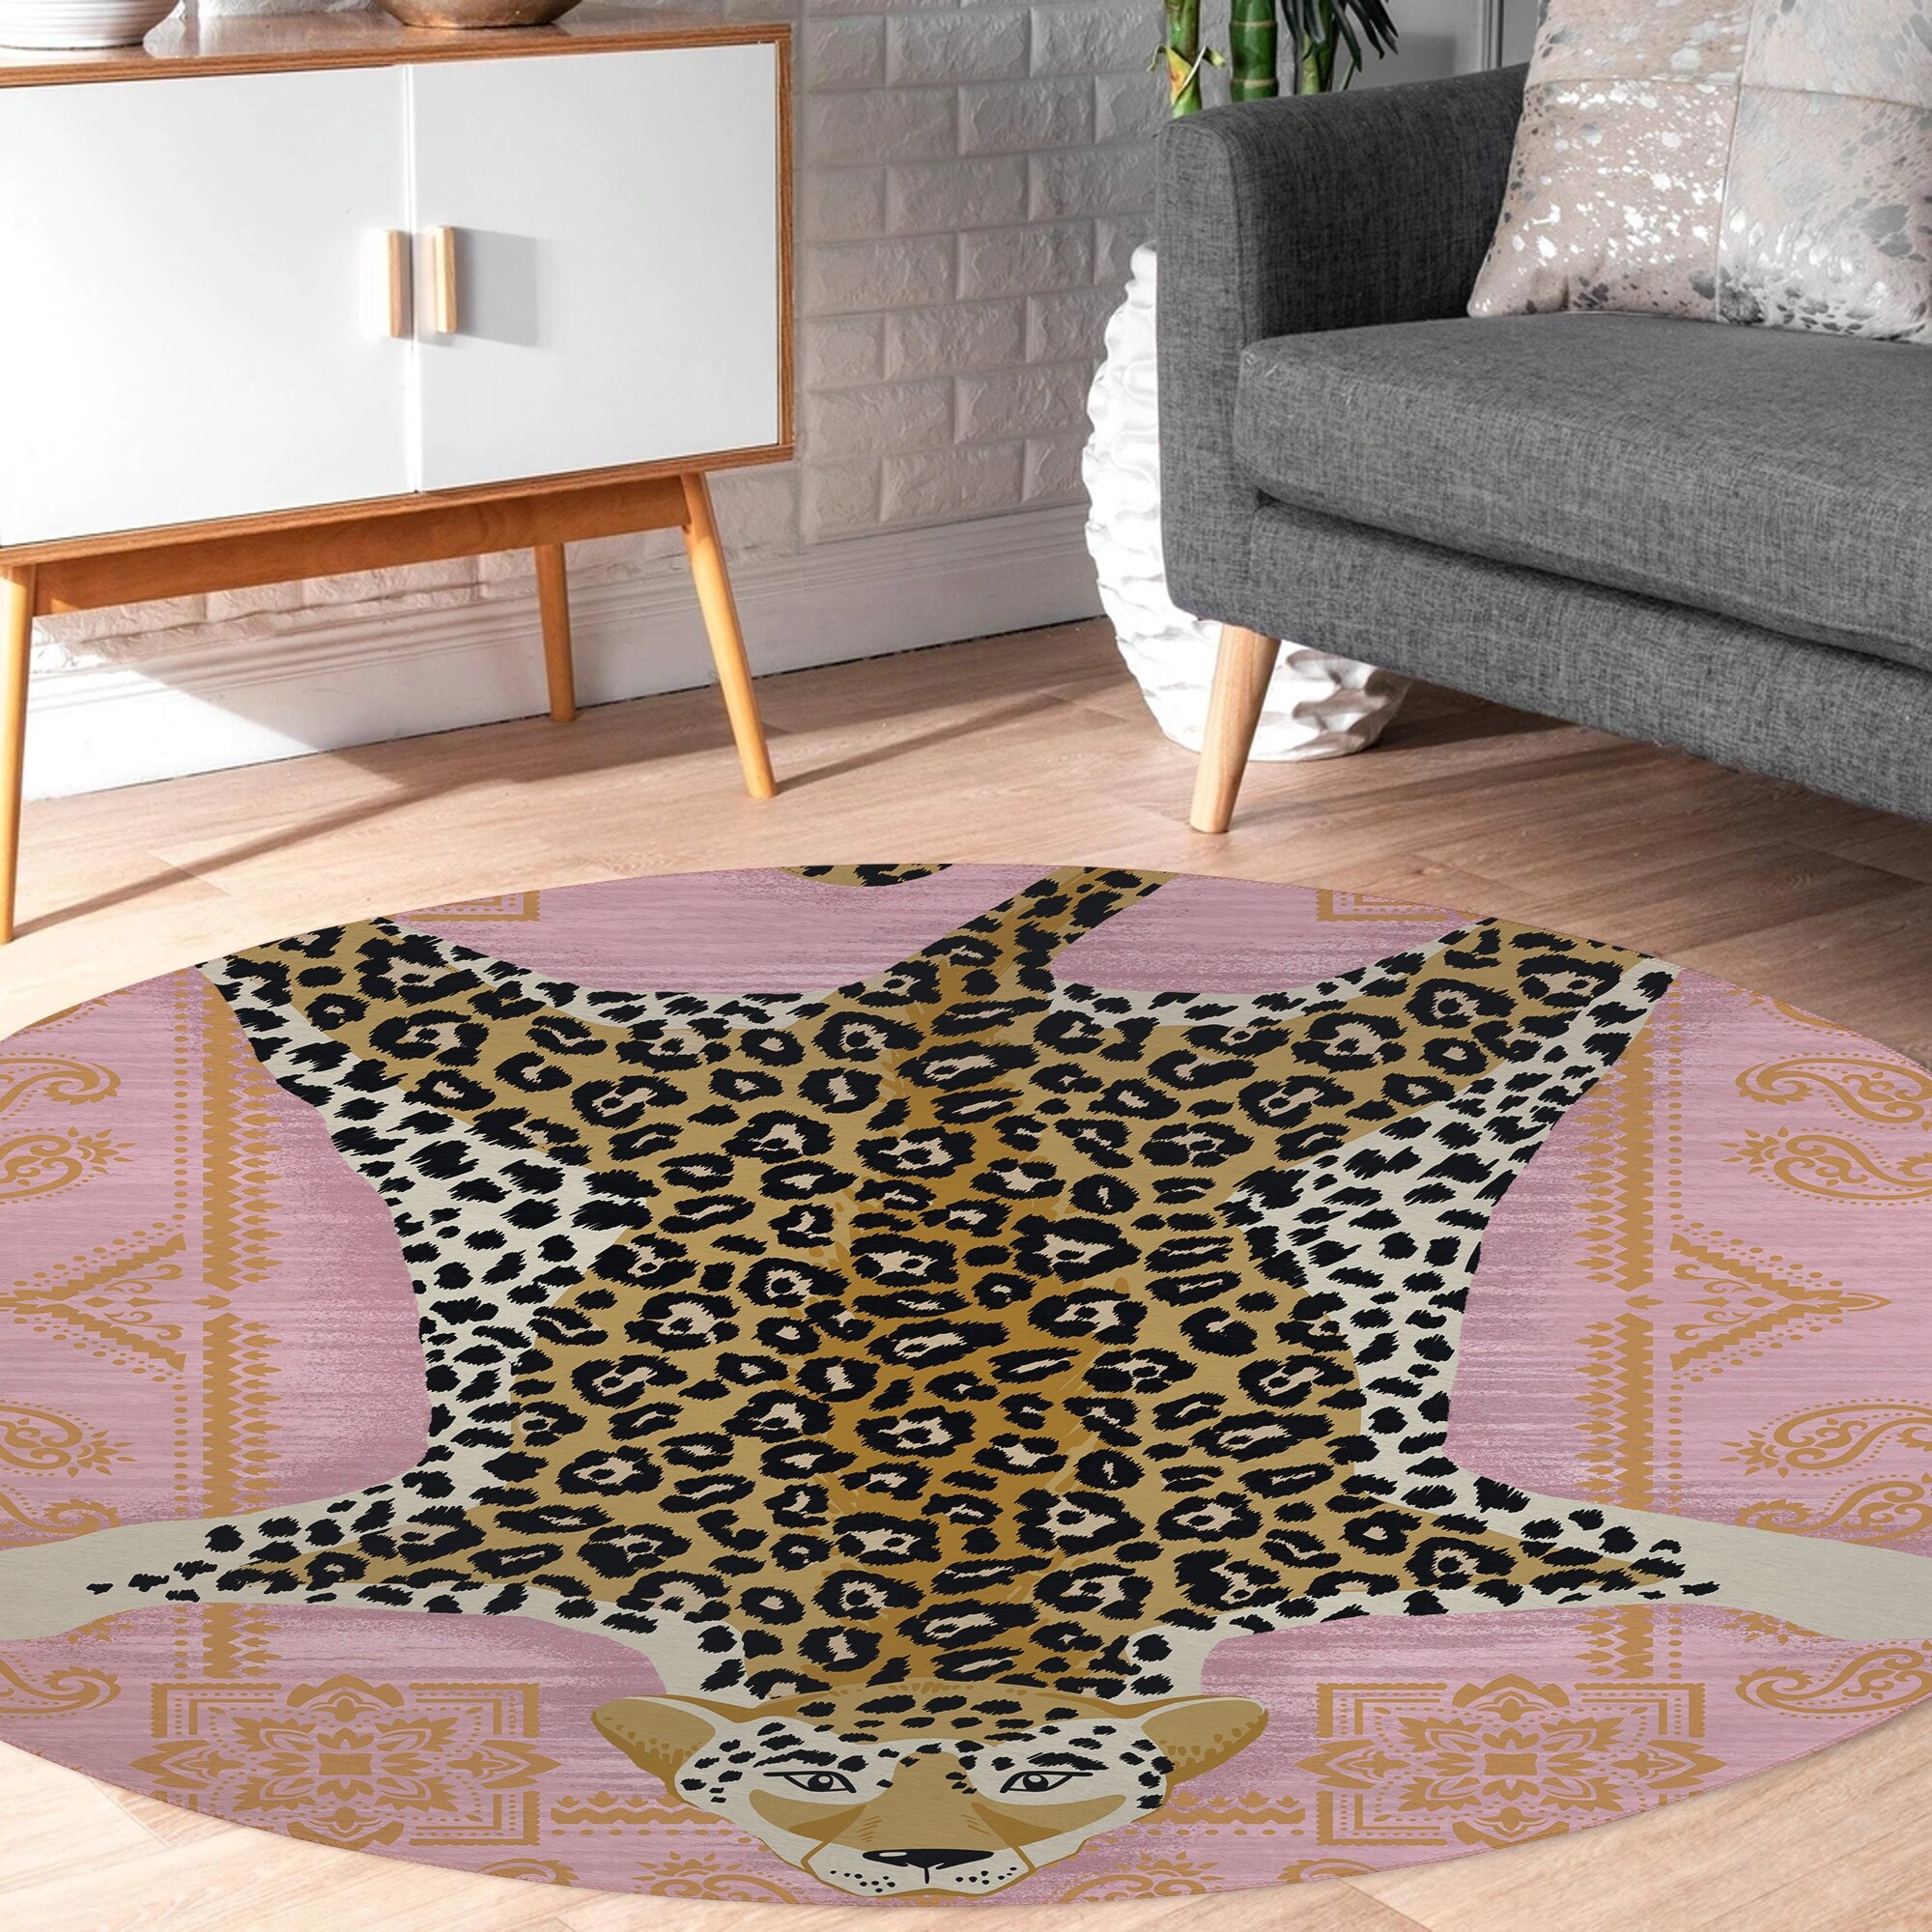 https://ak1.ostkcdn.com/images/products/is/images/direct/3562e4f7eb2ff18c46d11da51afc9fbcd384fff6/LEOPARD-RUG-PINK-Area-Rug-By-Kavka-Designs.jpg